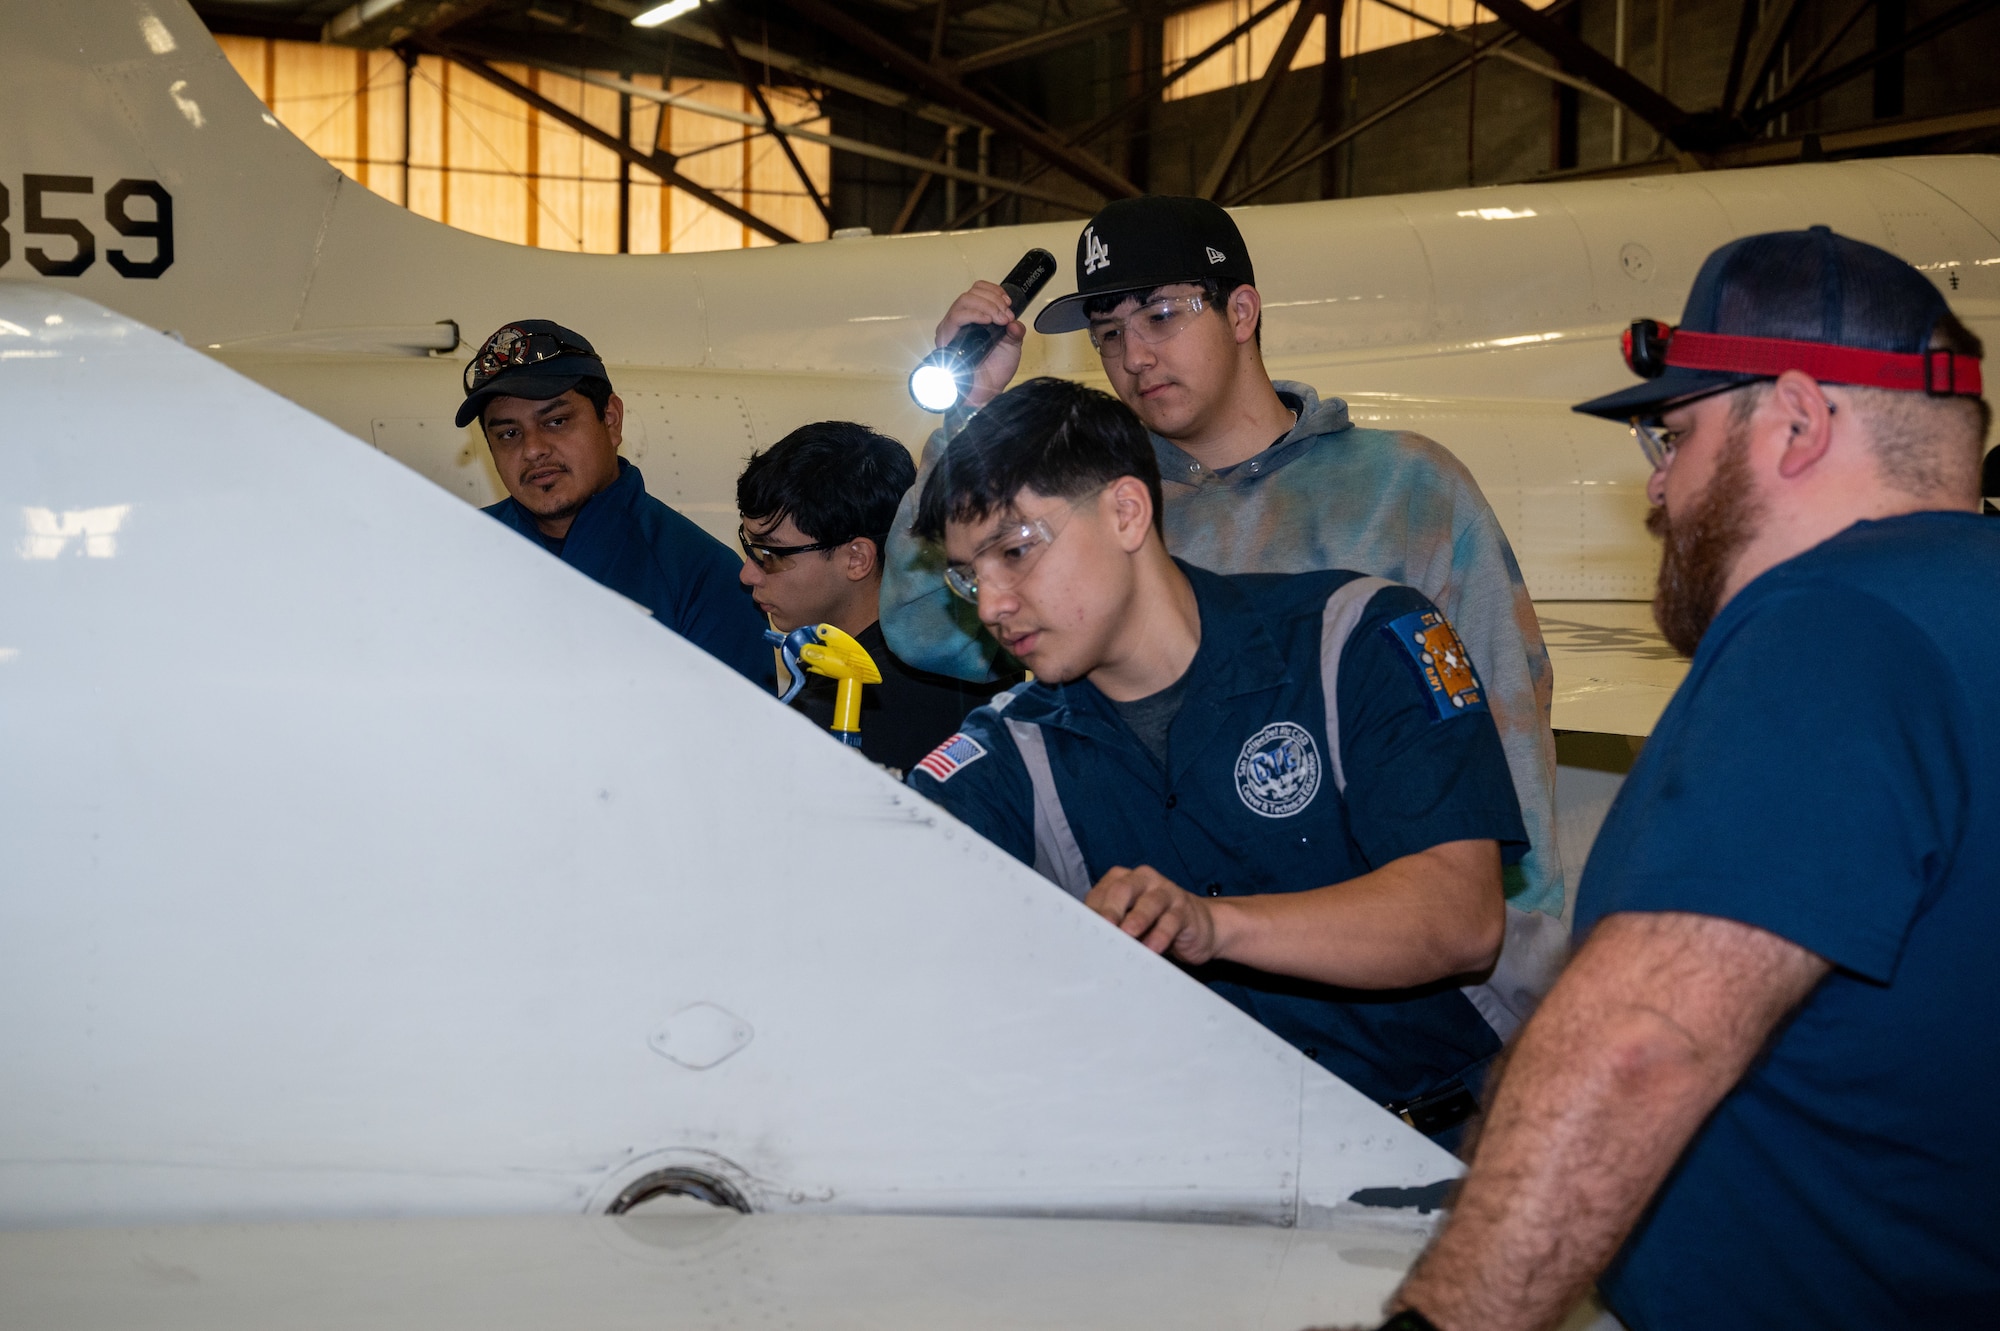 Members of the Laughlin Air Force Base, Texas, maintenance team instruct students on performing routine maintenance on a T-38C Talon on Jan. 30, 2023, at Laughlin Air Force Base, Texas. Senior Students in the program get the most amount of time and opportunity to get hands-on experience working with the aircraft. (U.S. Air Force photo by Senior Airman David Phaff)